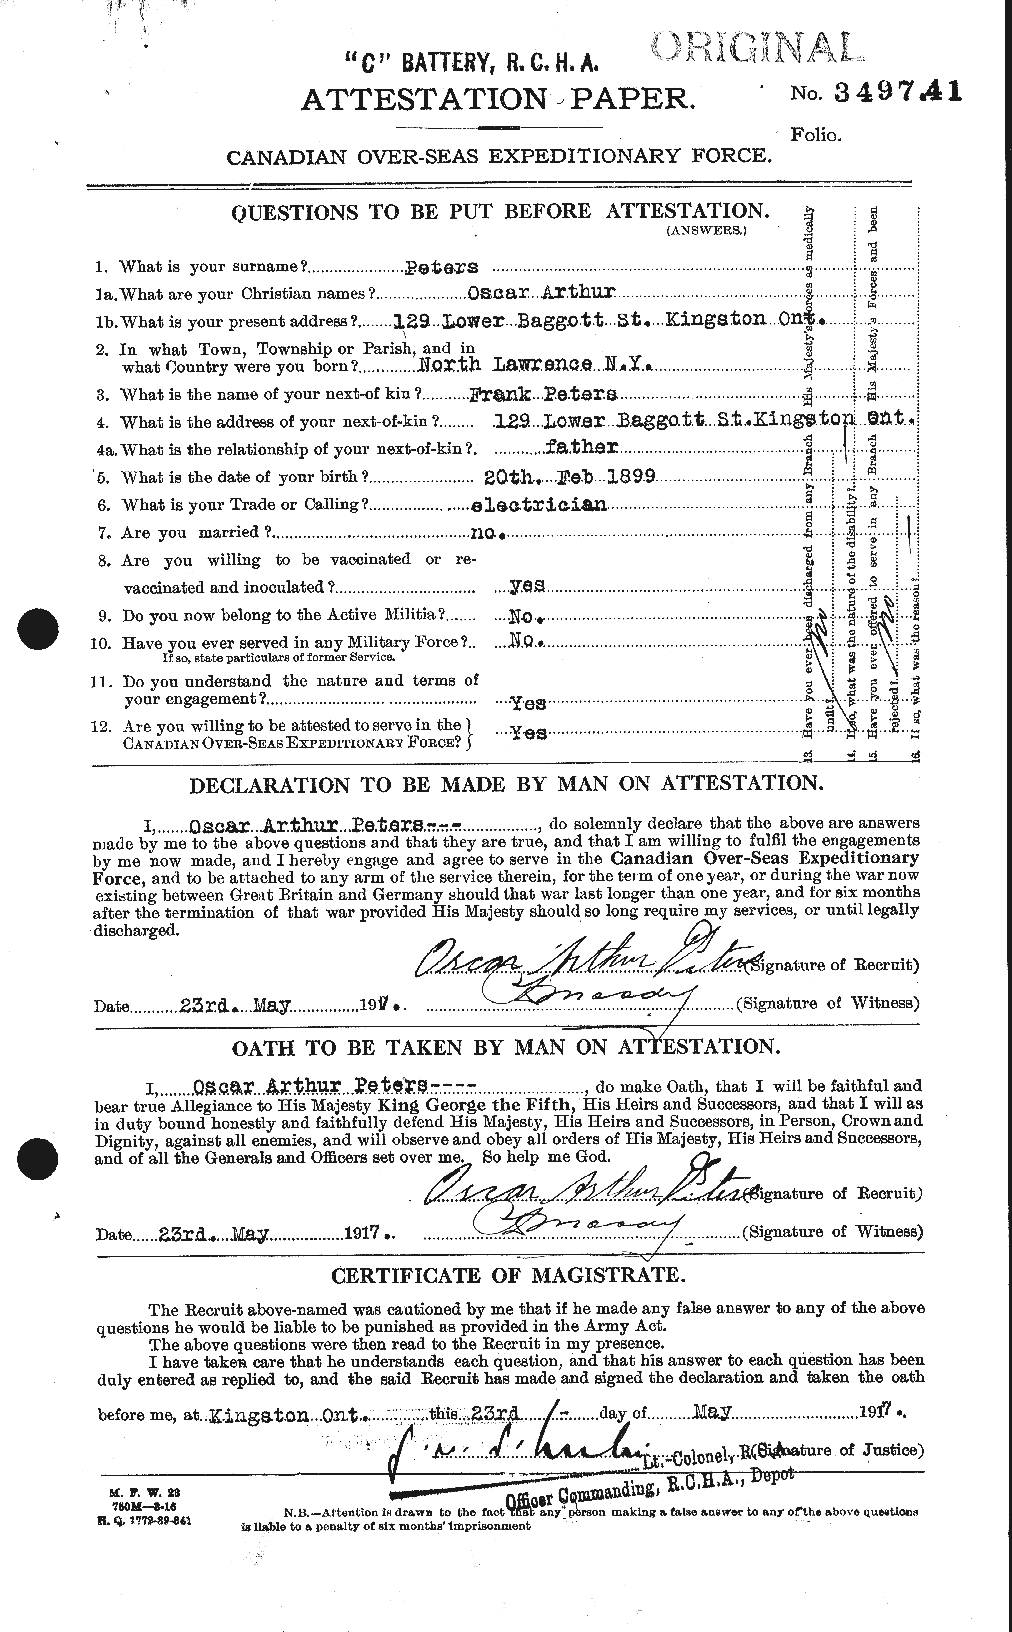 Personnel Records of the First World War - CEF 575591a